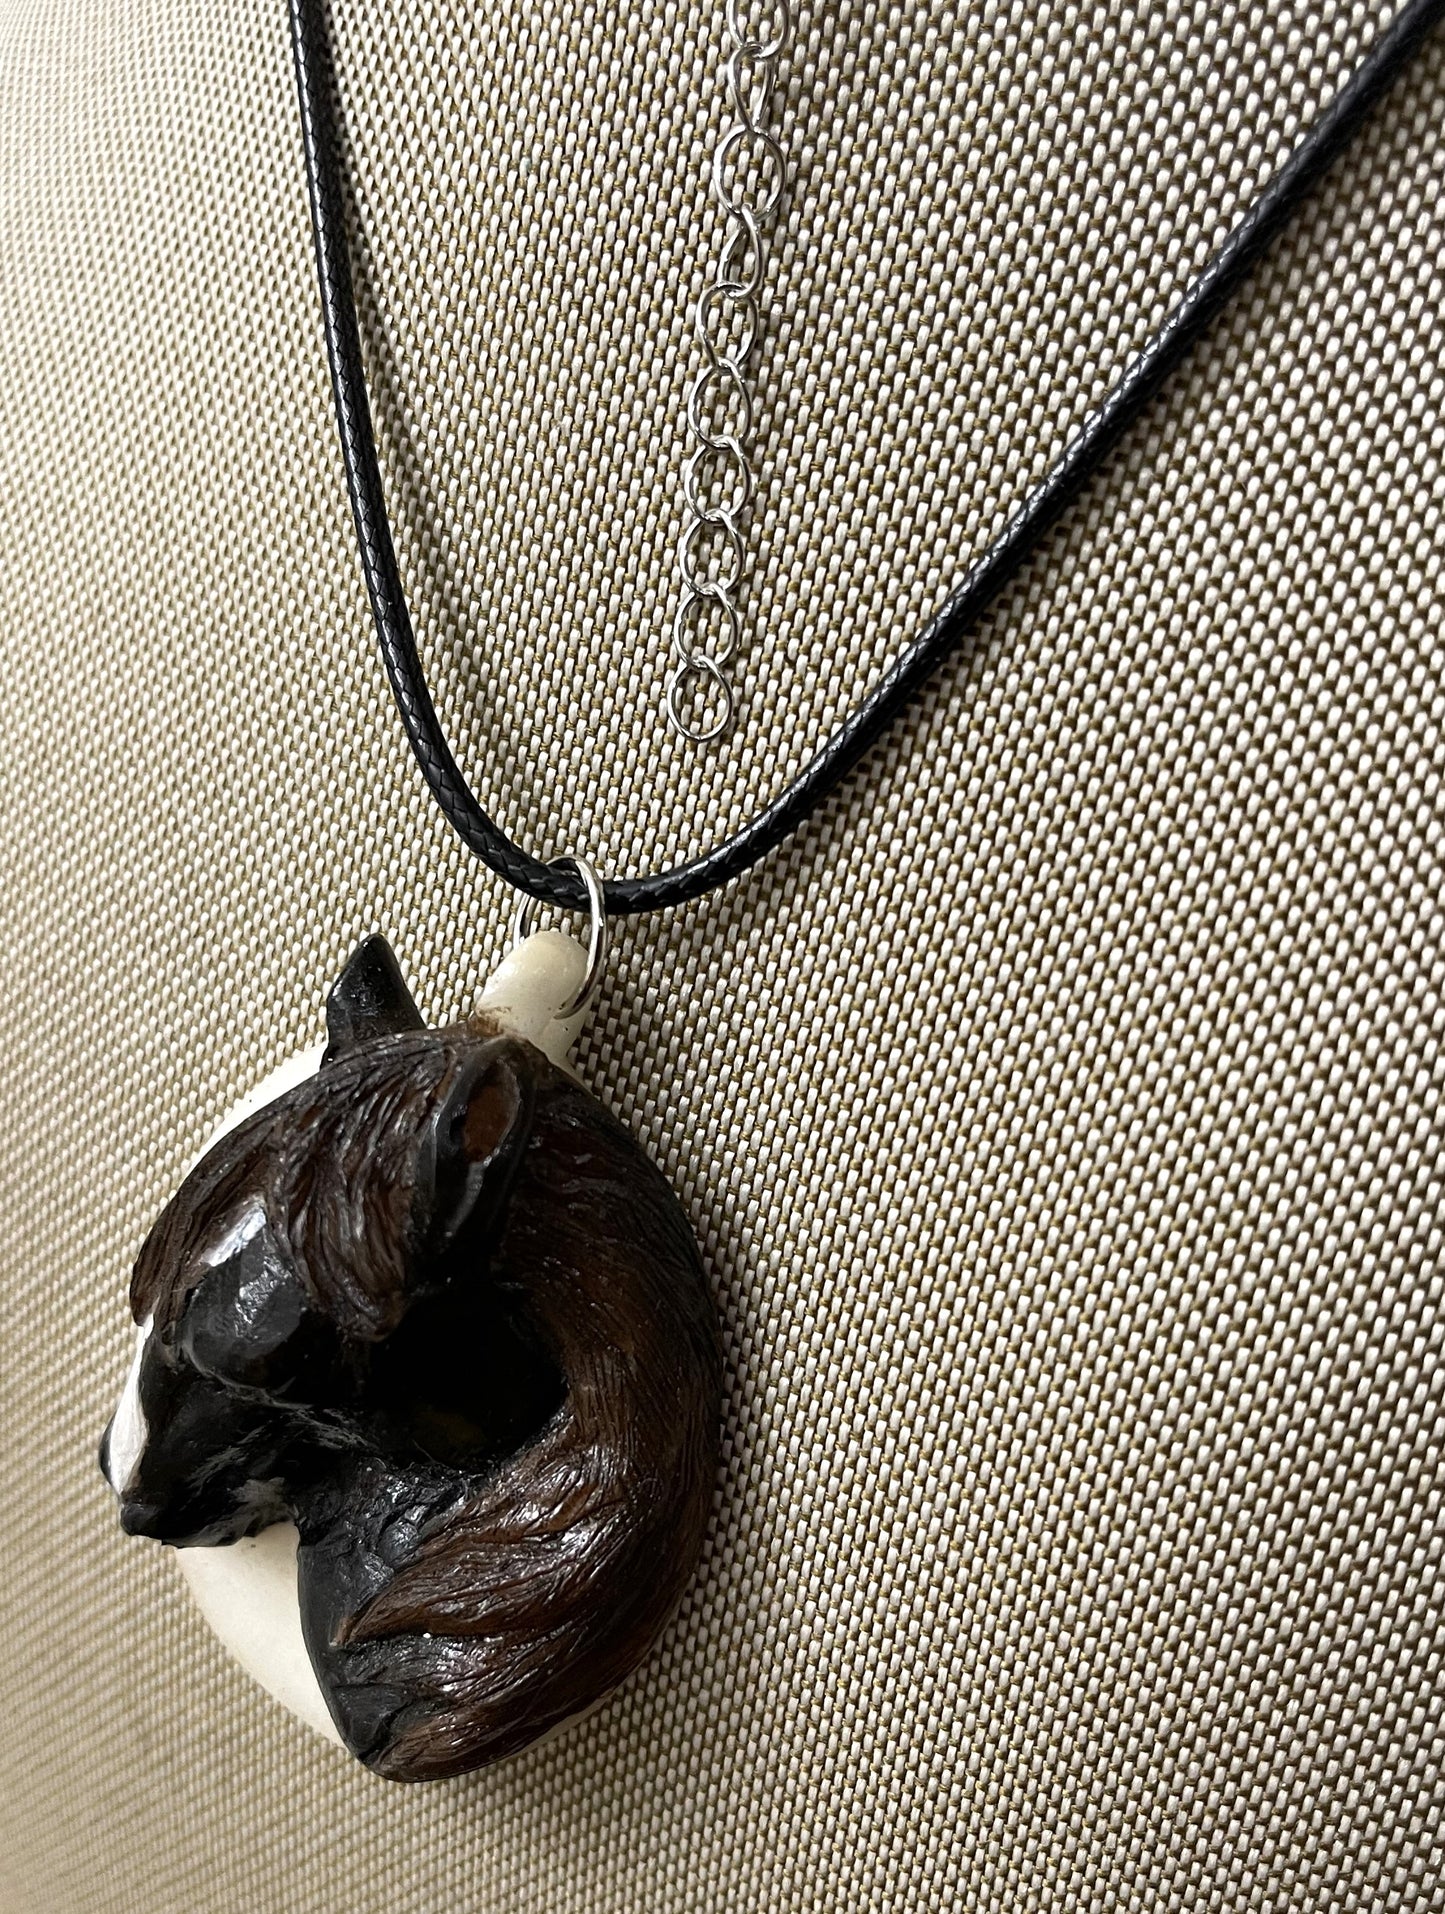 Brown Horse White Nose Carved Necklace Pendant Panama